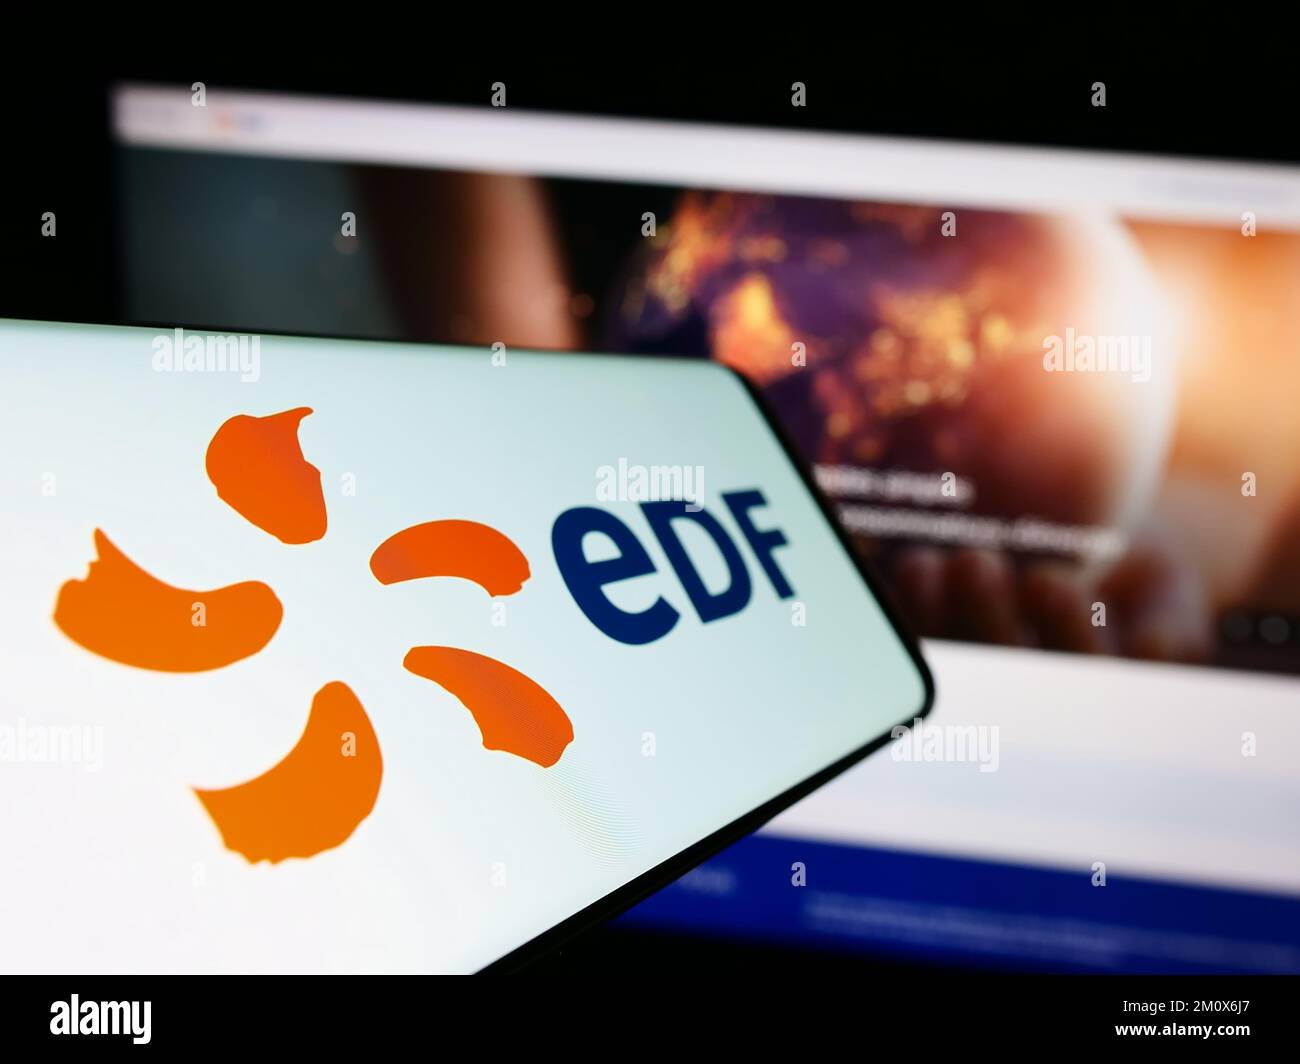 Smartphone with logo of energy company Electricite de France S.A. (EDF) on screen in front of website. Focus on center-left of phone display. Stock Photo